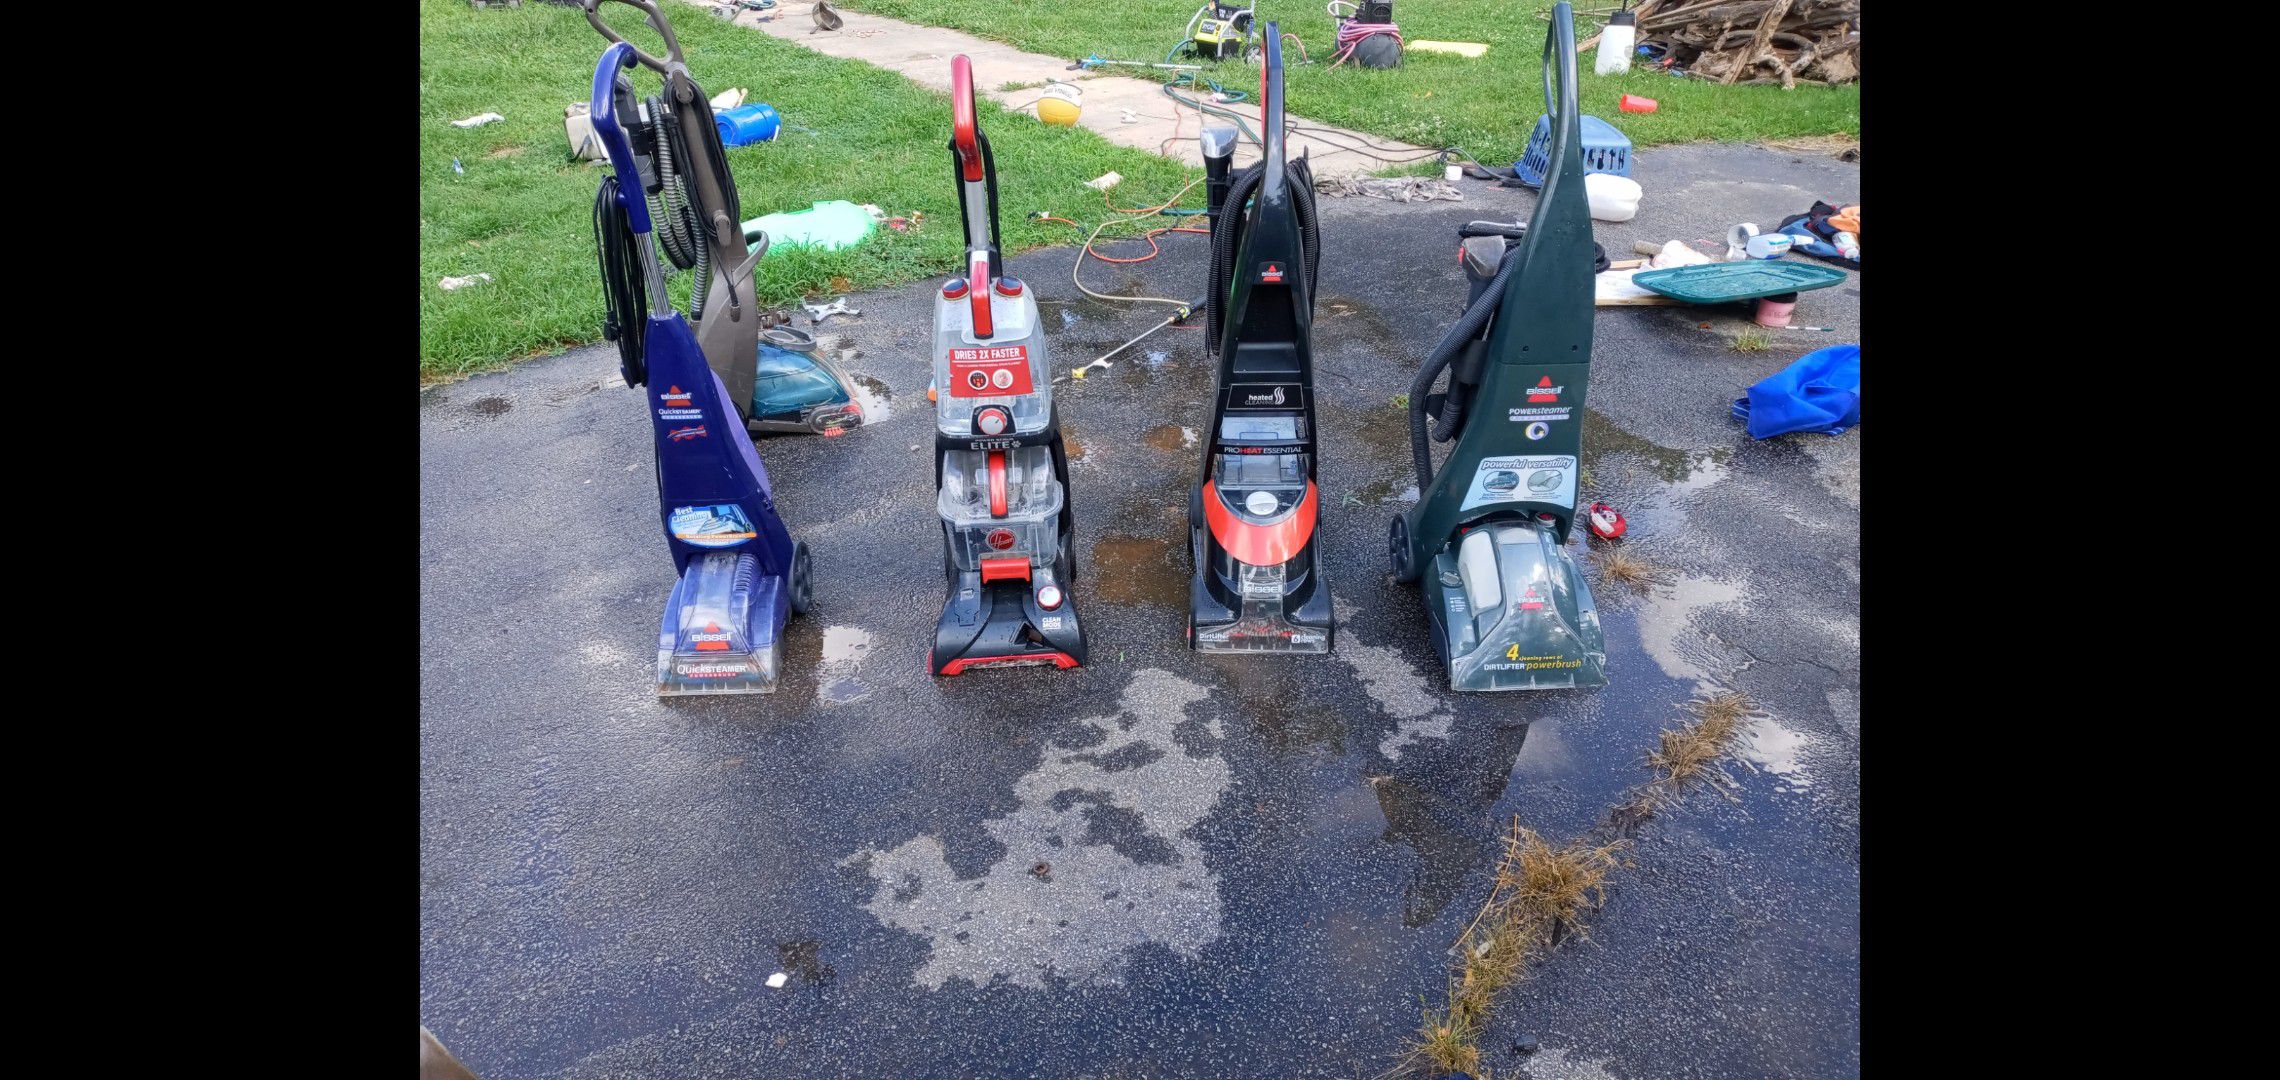 Steam cleaners $40-$60